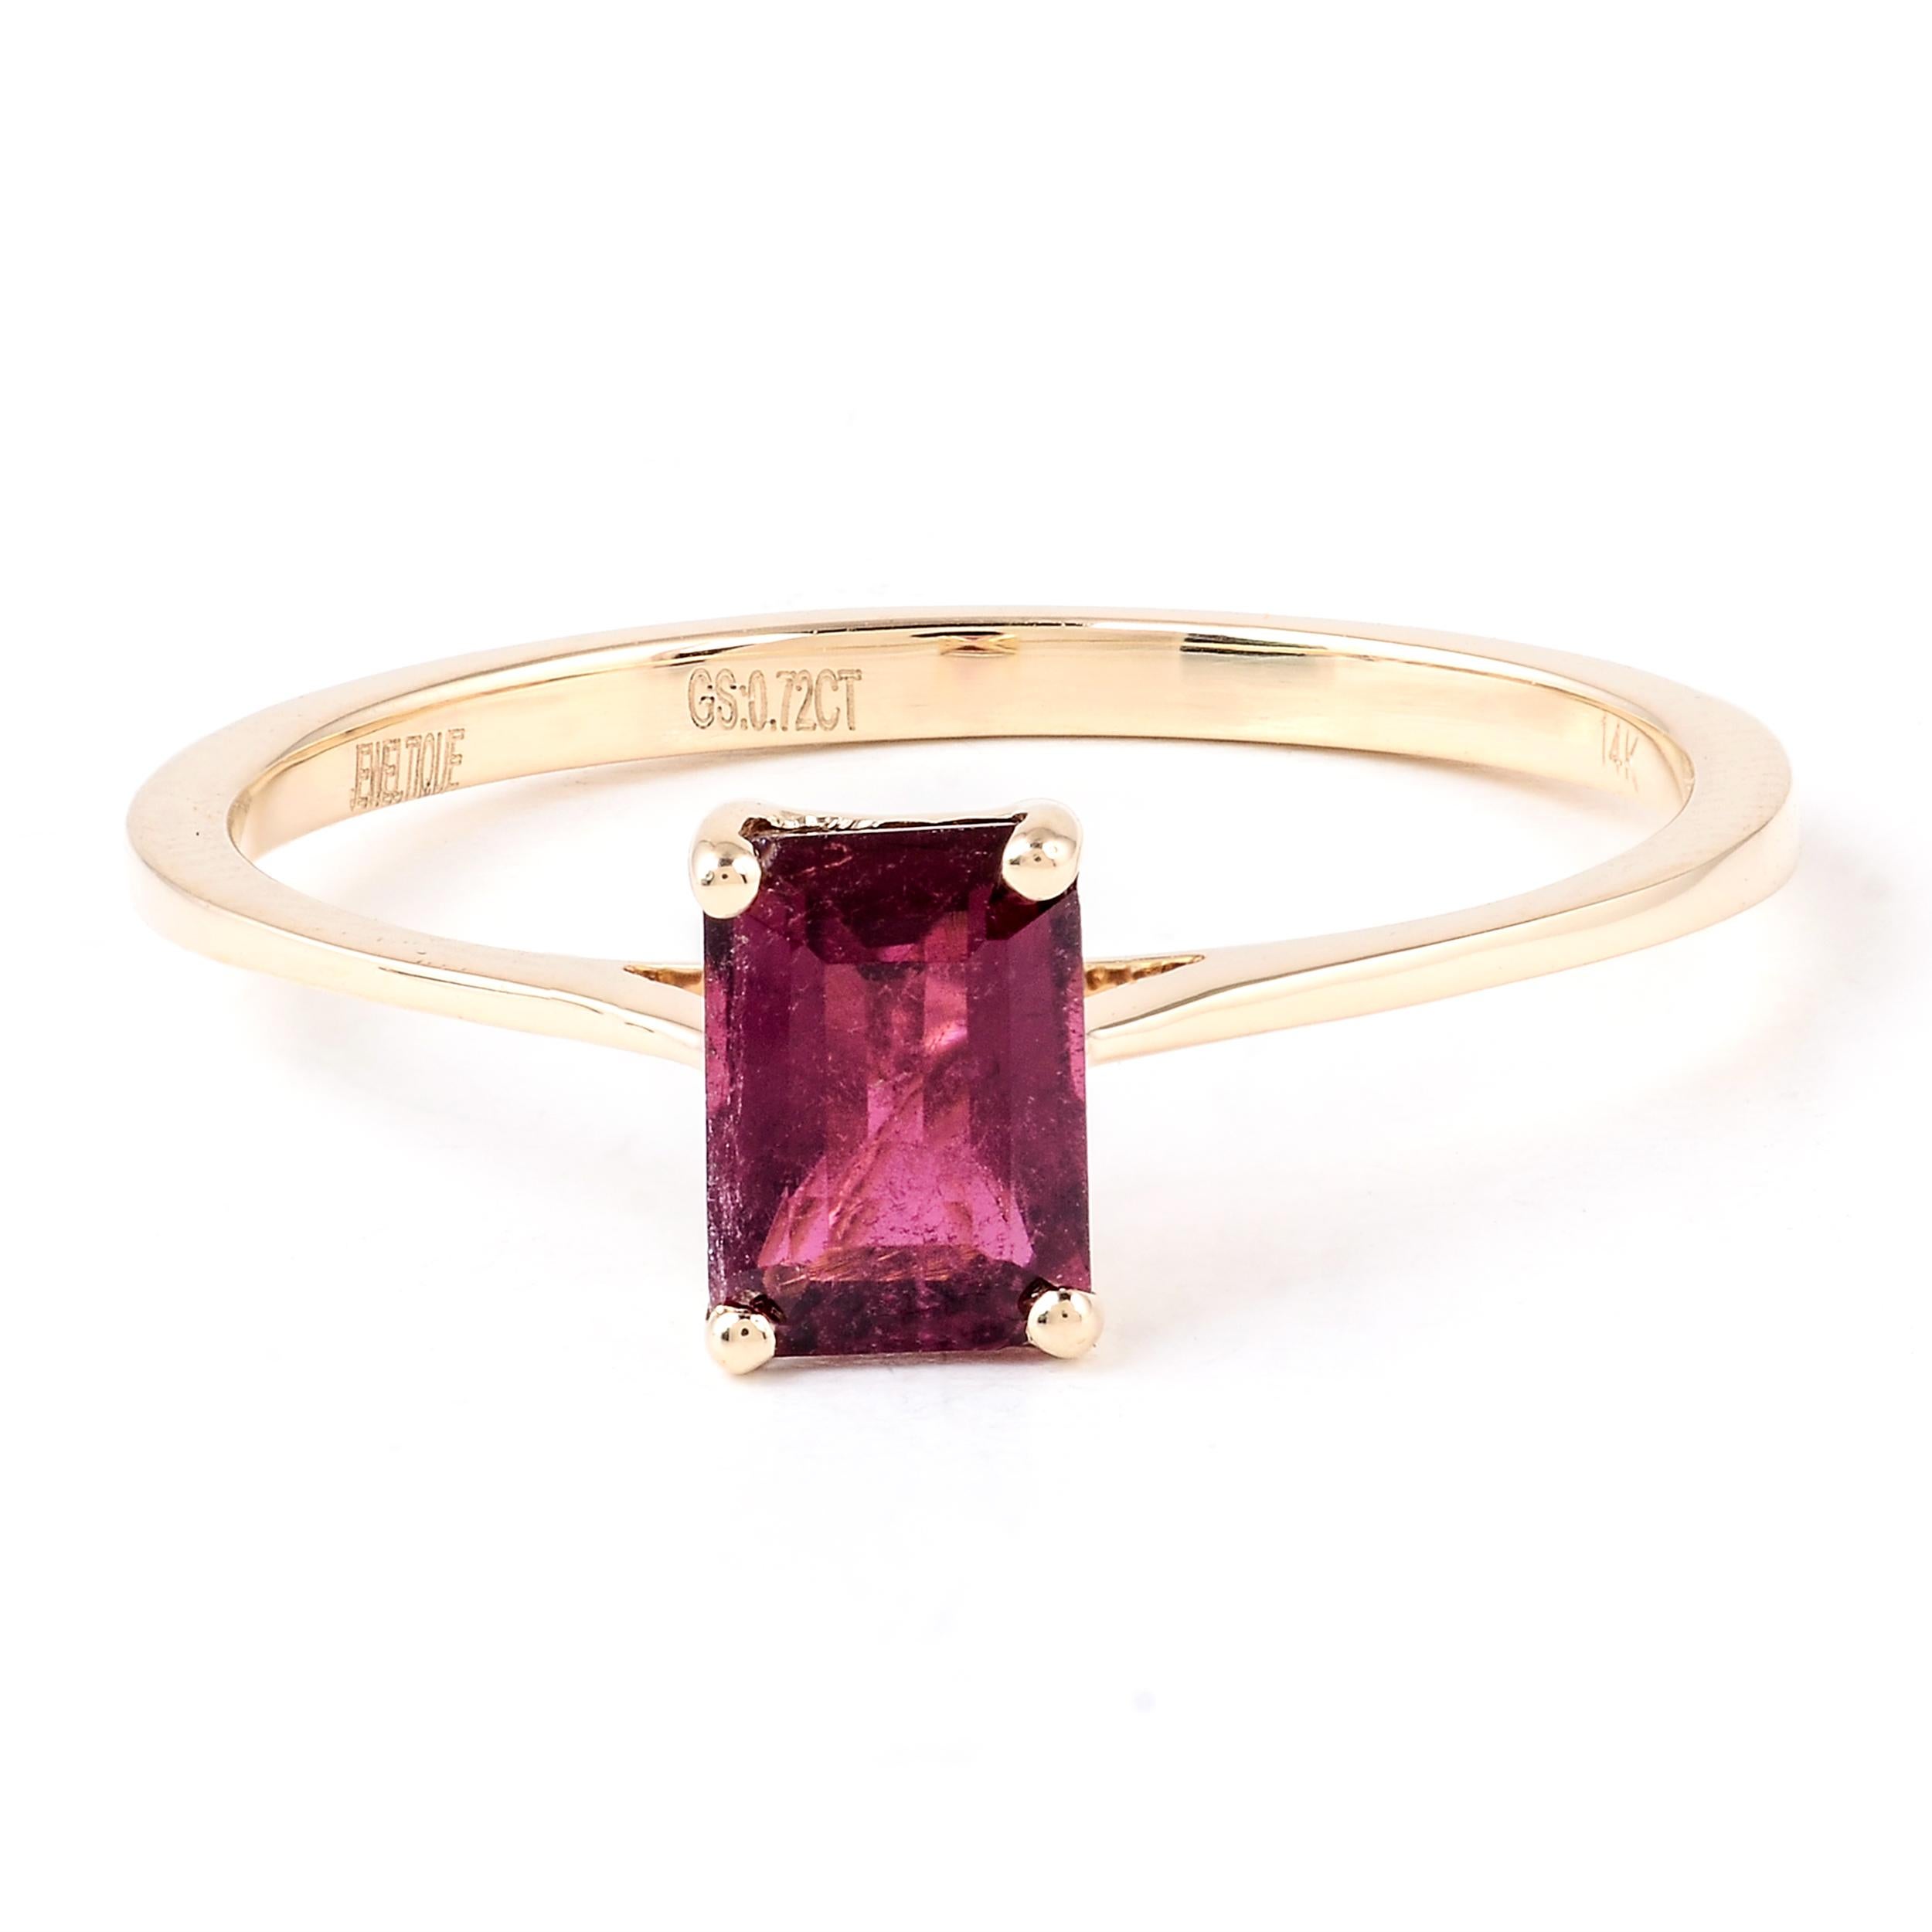 Elegant 14K Tourmaline Cocktail Ring, Size 7 - Stunning Statement Jewelry Piece In New Condition For Sale In Holtsville, NY